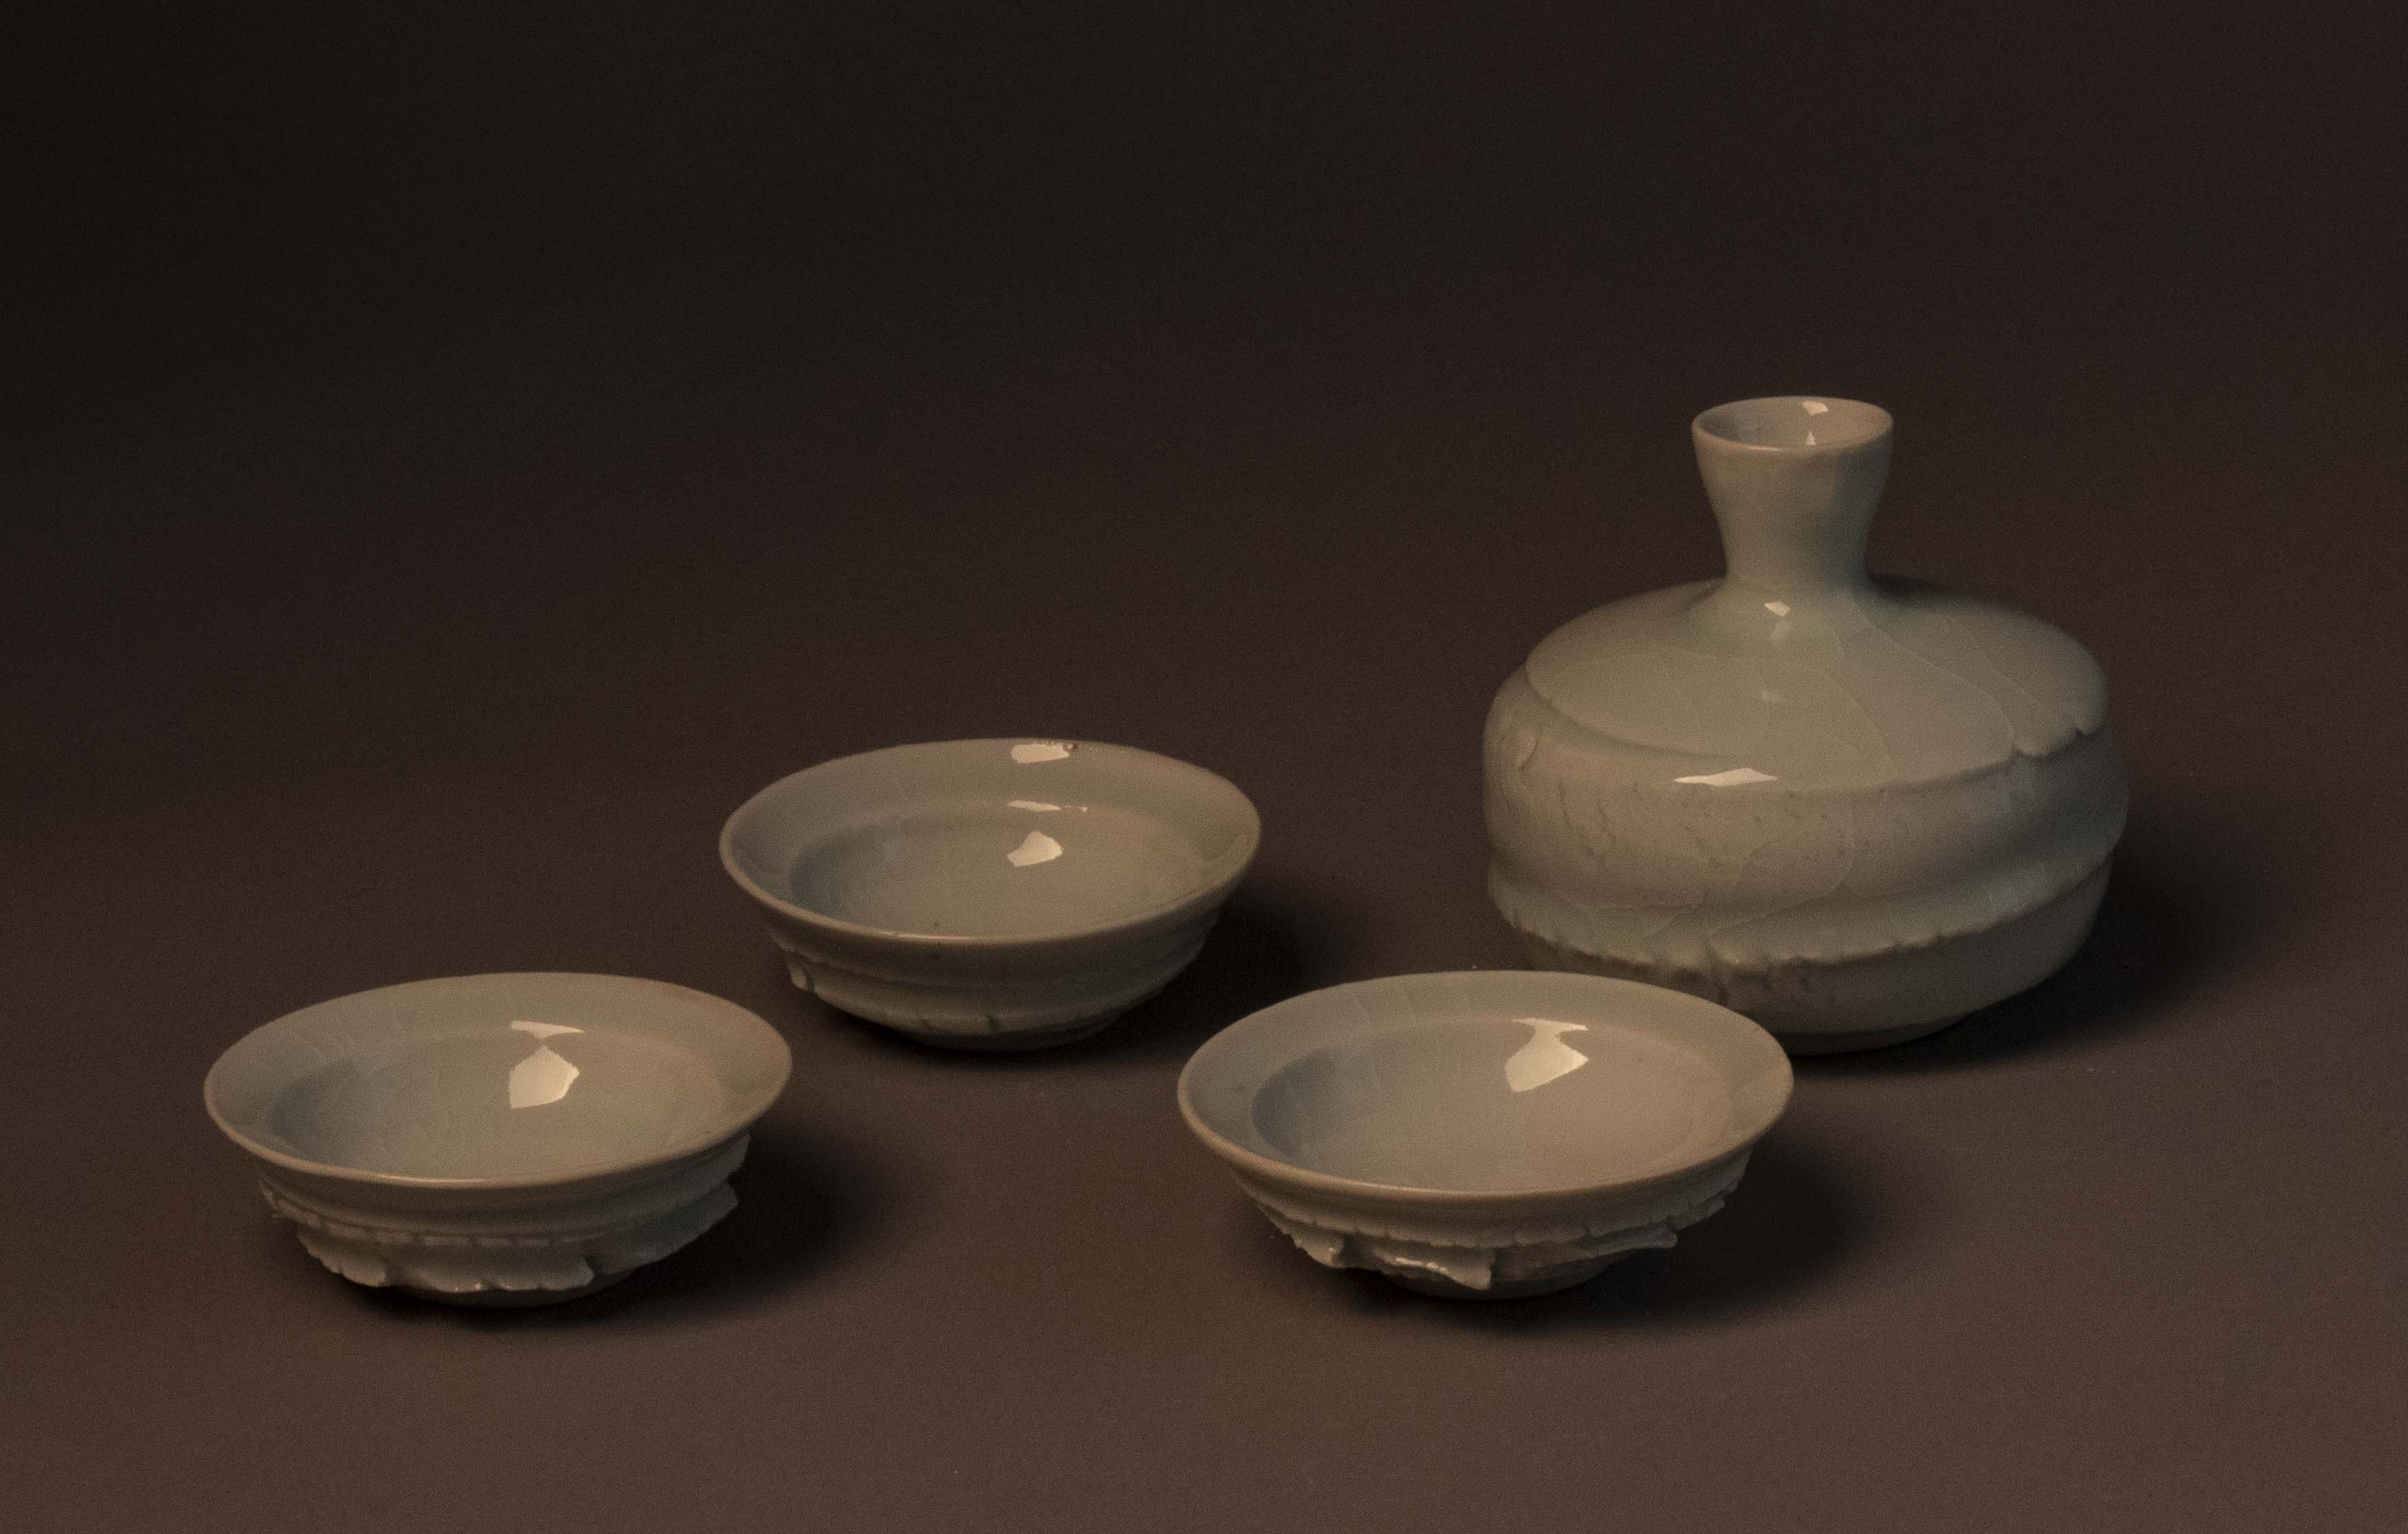 Three small saucer-shaped cups, and a vase-like bottle. The interior surfaces of the shallow cups (guinomi) are smooth while the exterior bottom portions of the cups have a texture that might almost feel jagged like chipped stone. The bottle (tokkuri) has a squat almost barrel-like shape with a neck that is narrow at the base and flares out at the lip. While the neck and shoulder of the bottle are smooth, the body portion of the vessel has some the same stretched clay textures as the exterior of the cups. The glaze is glassy and relatively smooth, though thin cracks can be seen in the glaze (crazing).